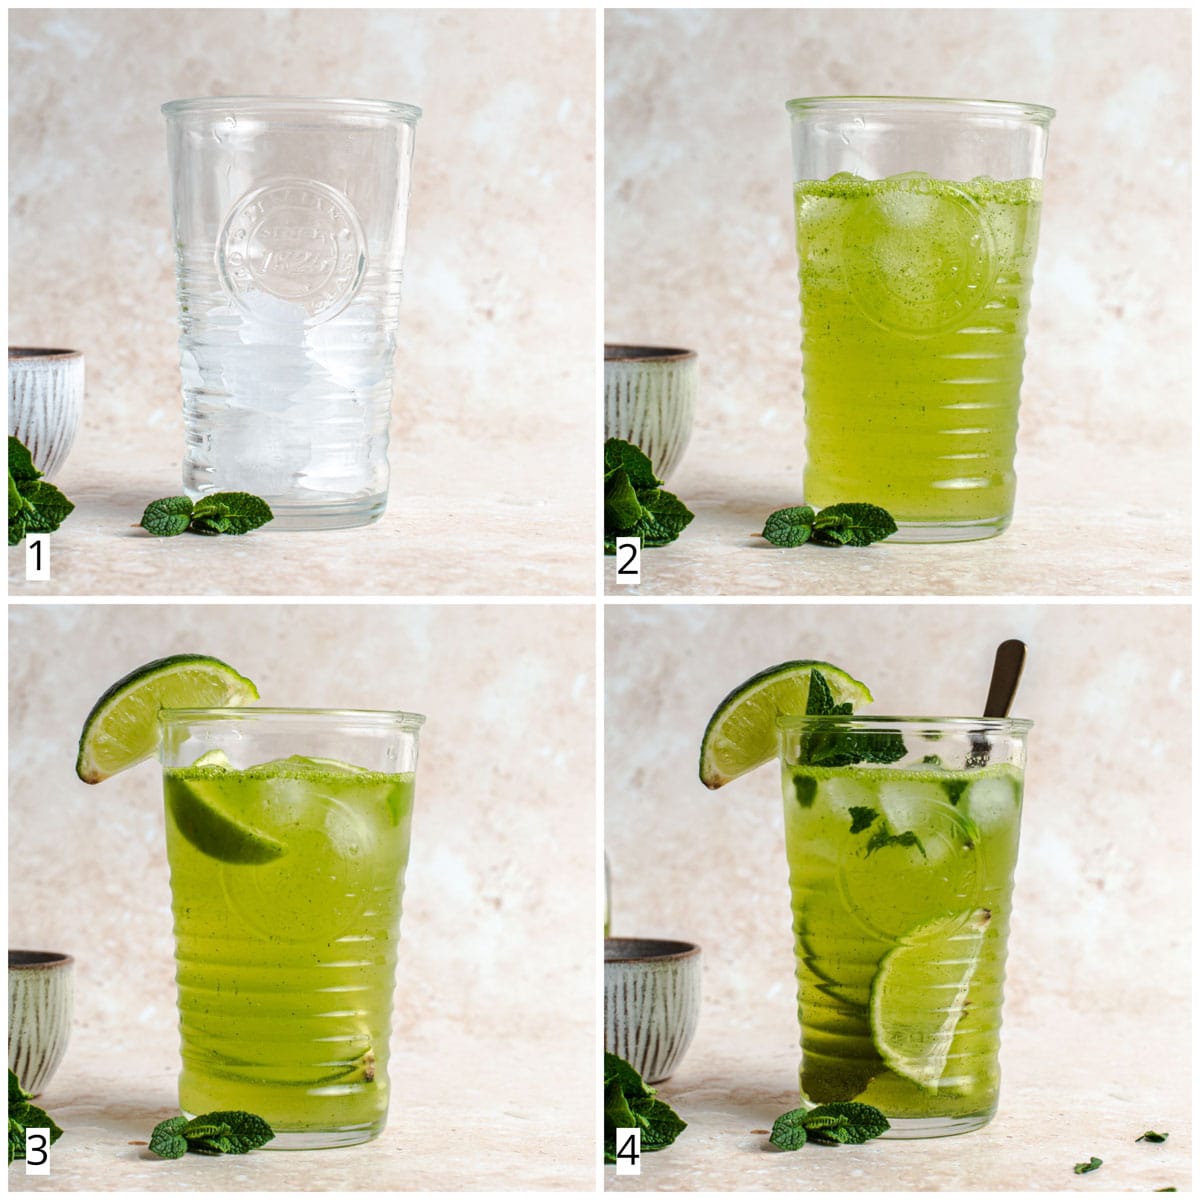 A collage of four images showing four steps in decorating a mojito cocktail.